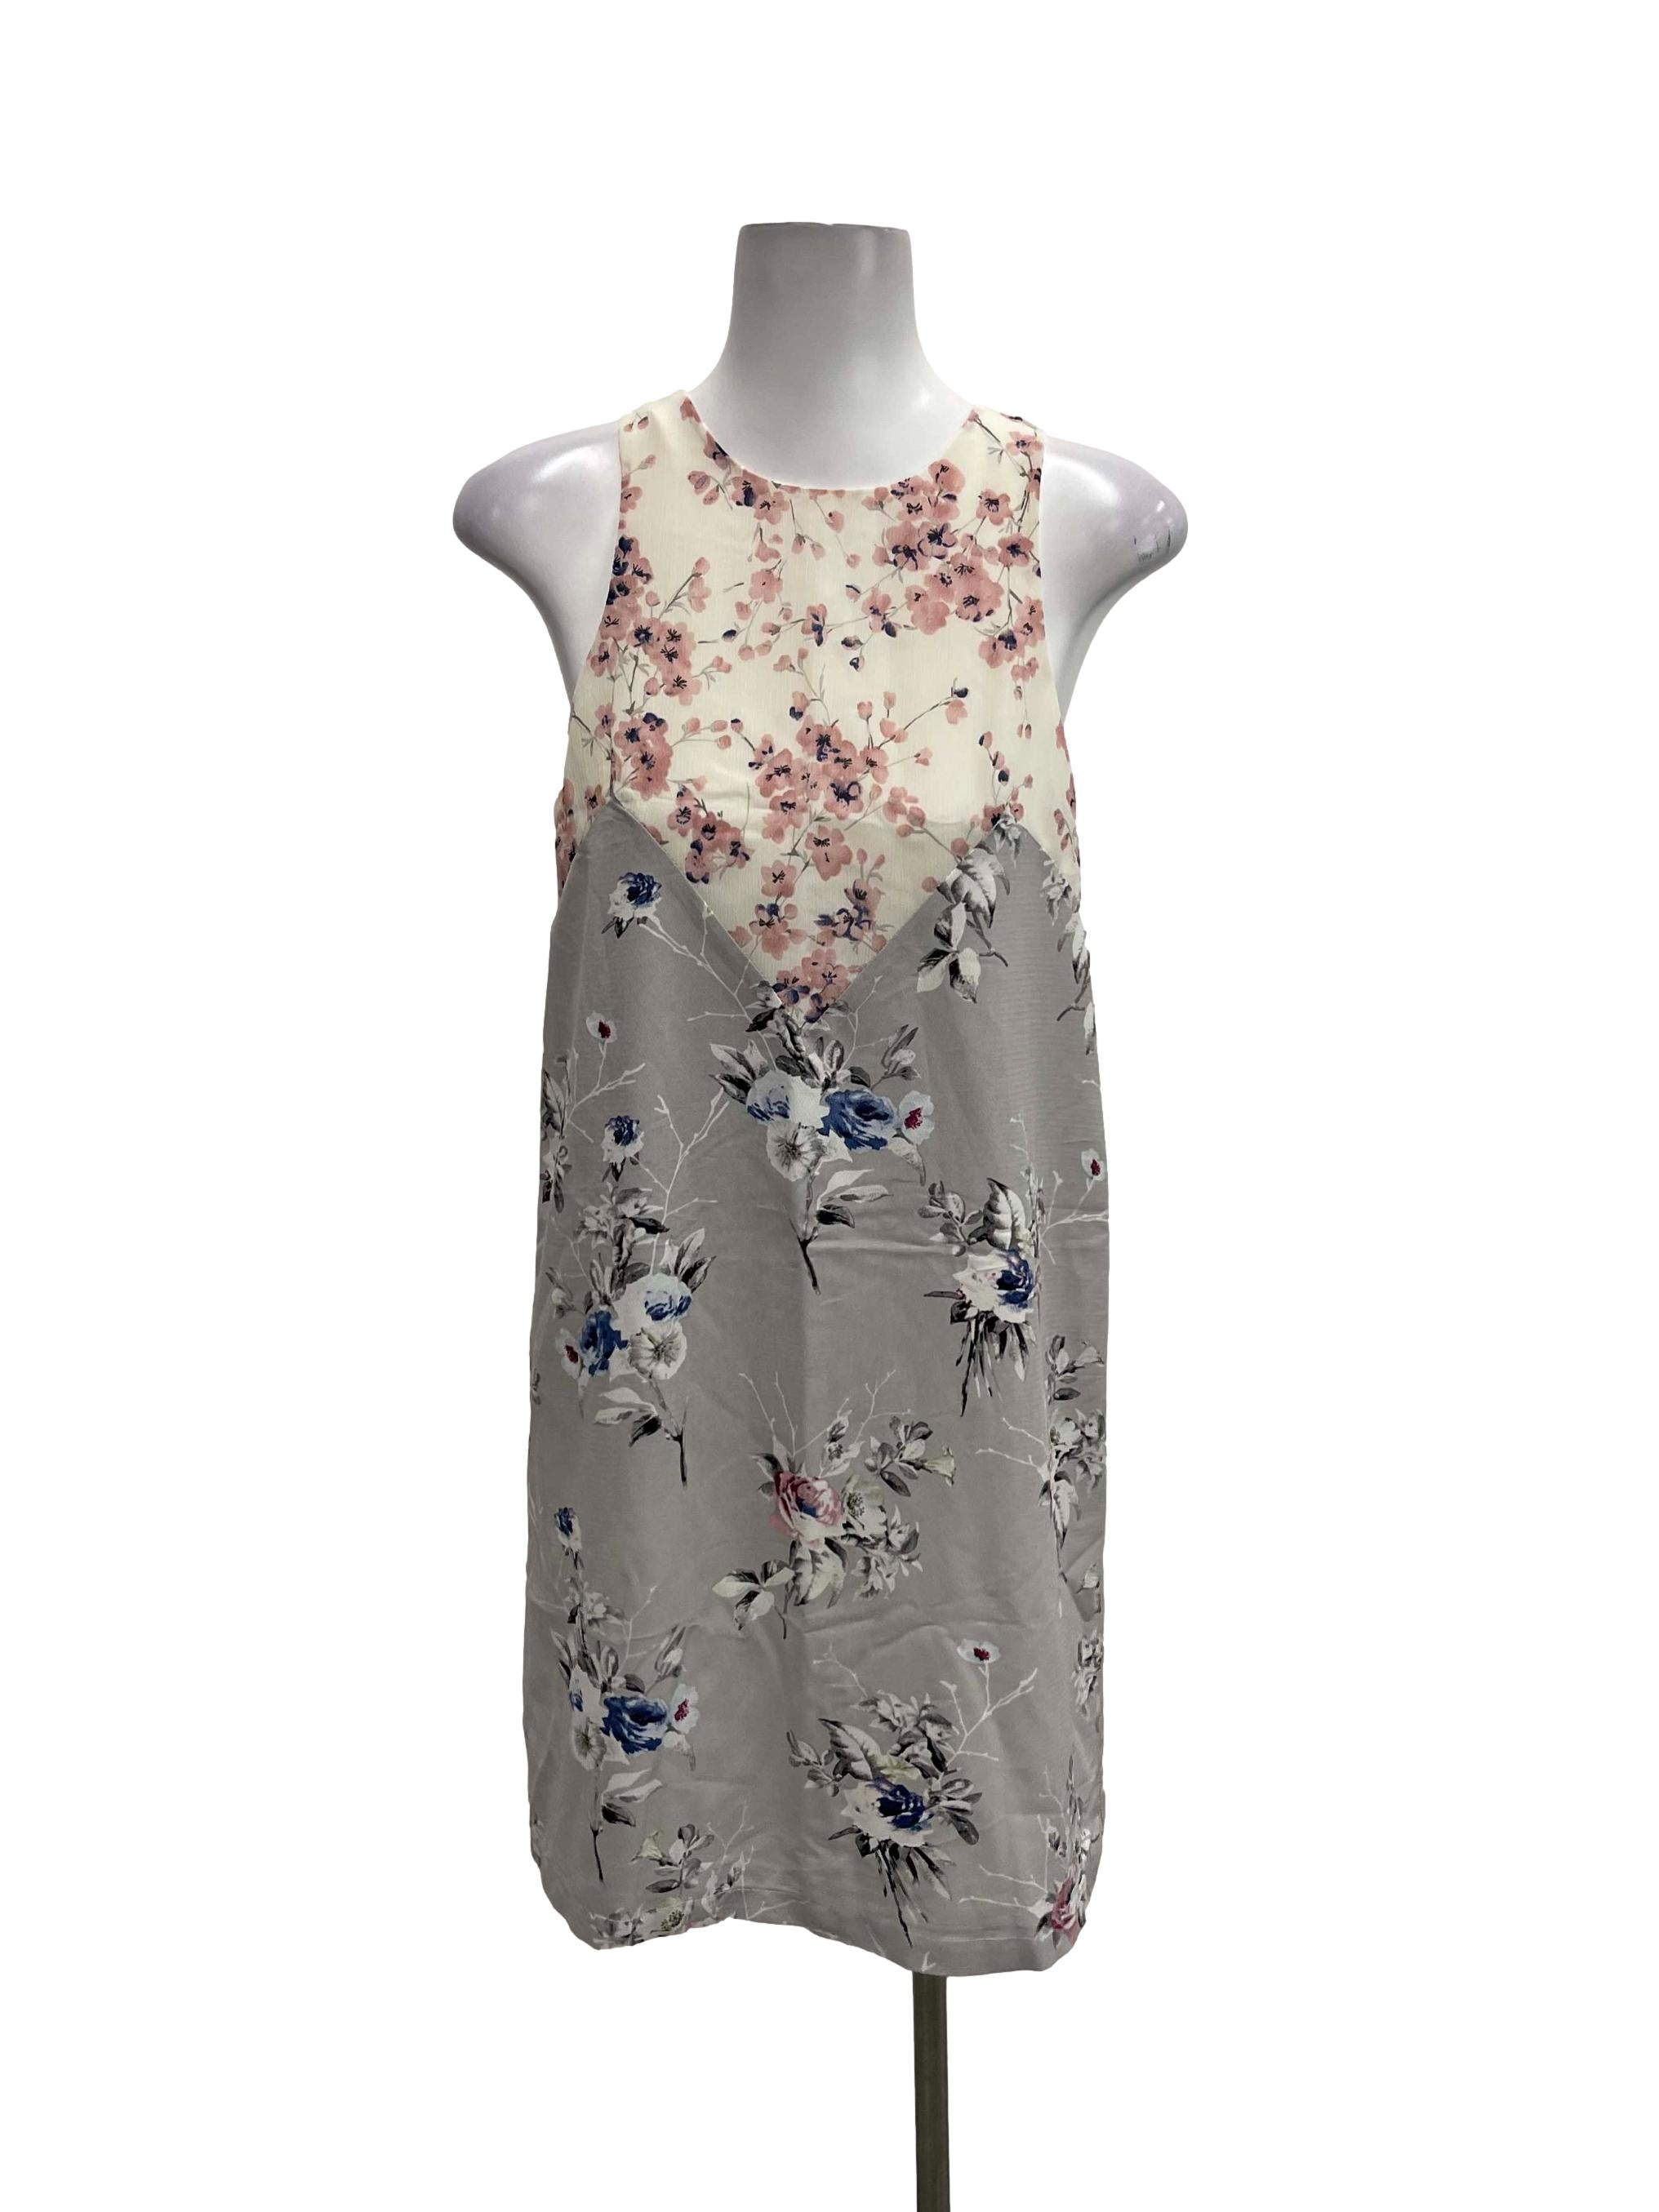 White And Grey Round Neck Sleeveless Dress With Cherry Blossoms